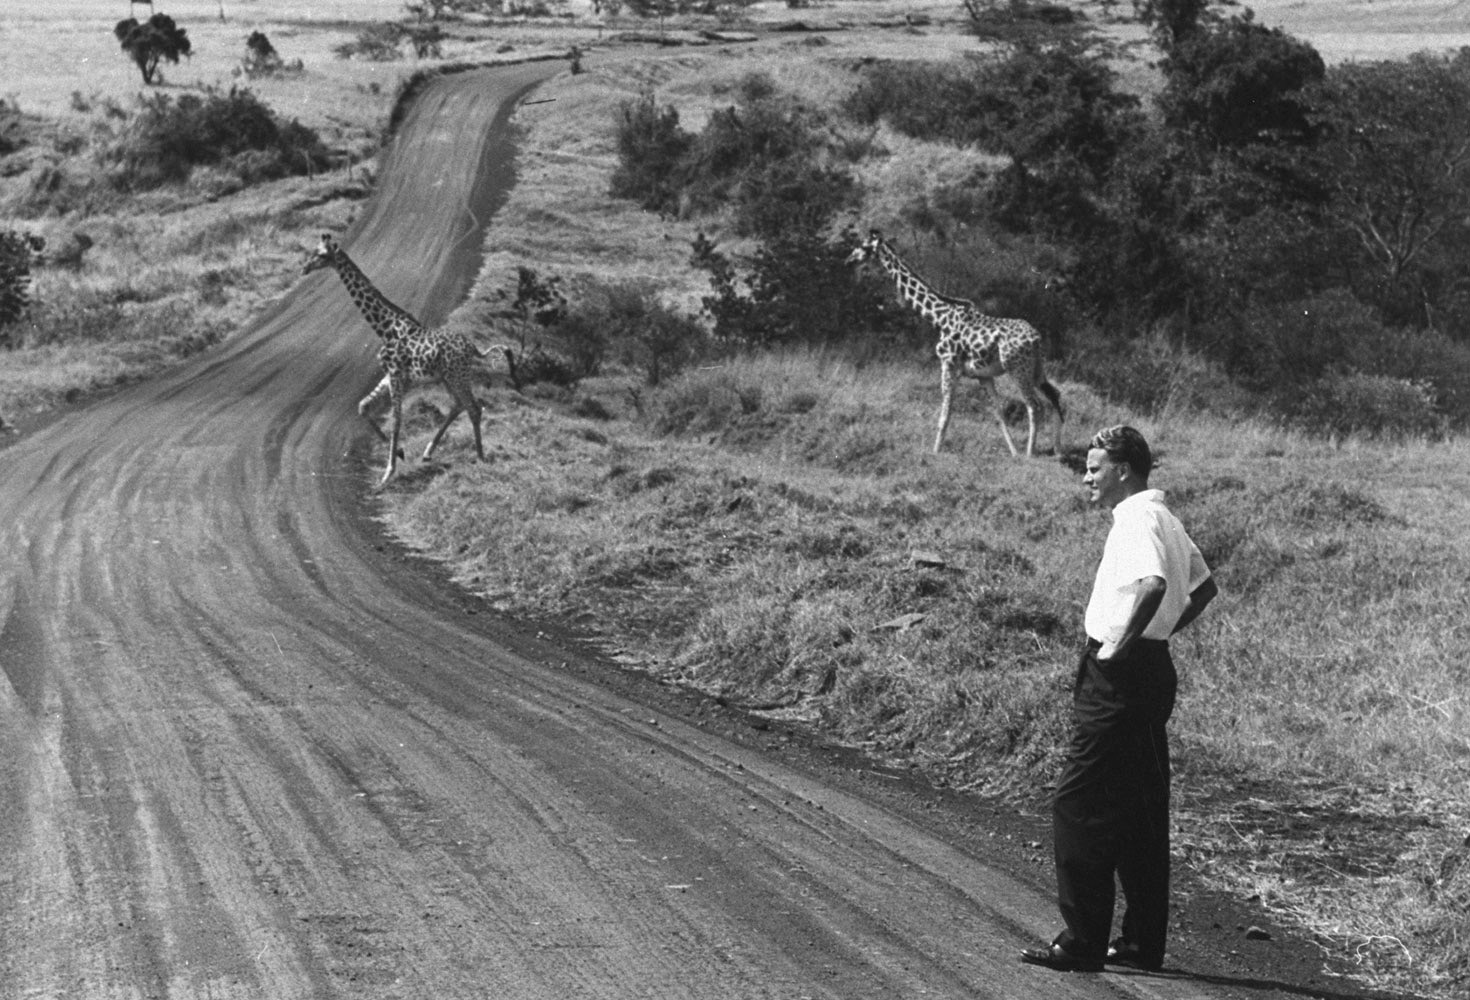 Two by Two
                              
                              Watching a pair of giraffes cross the road while on a missionary trip in Kenya.